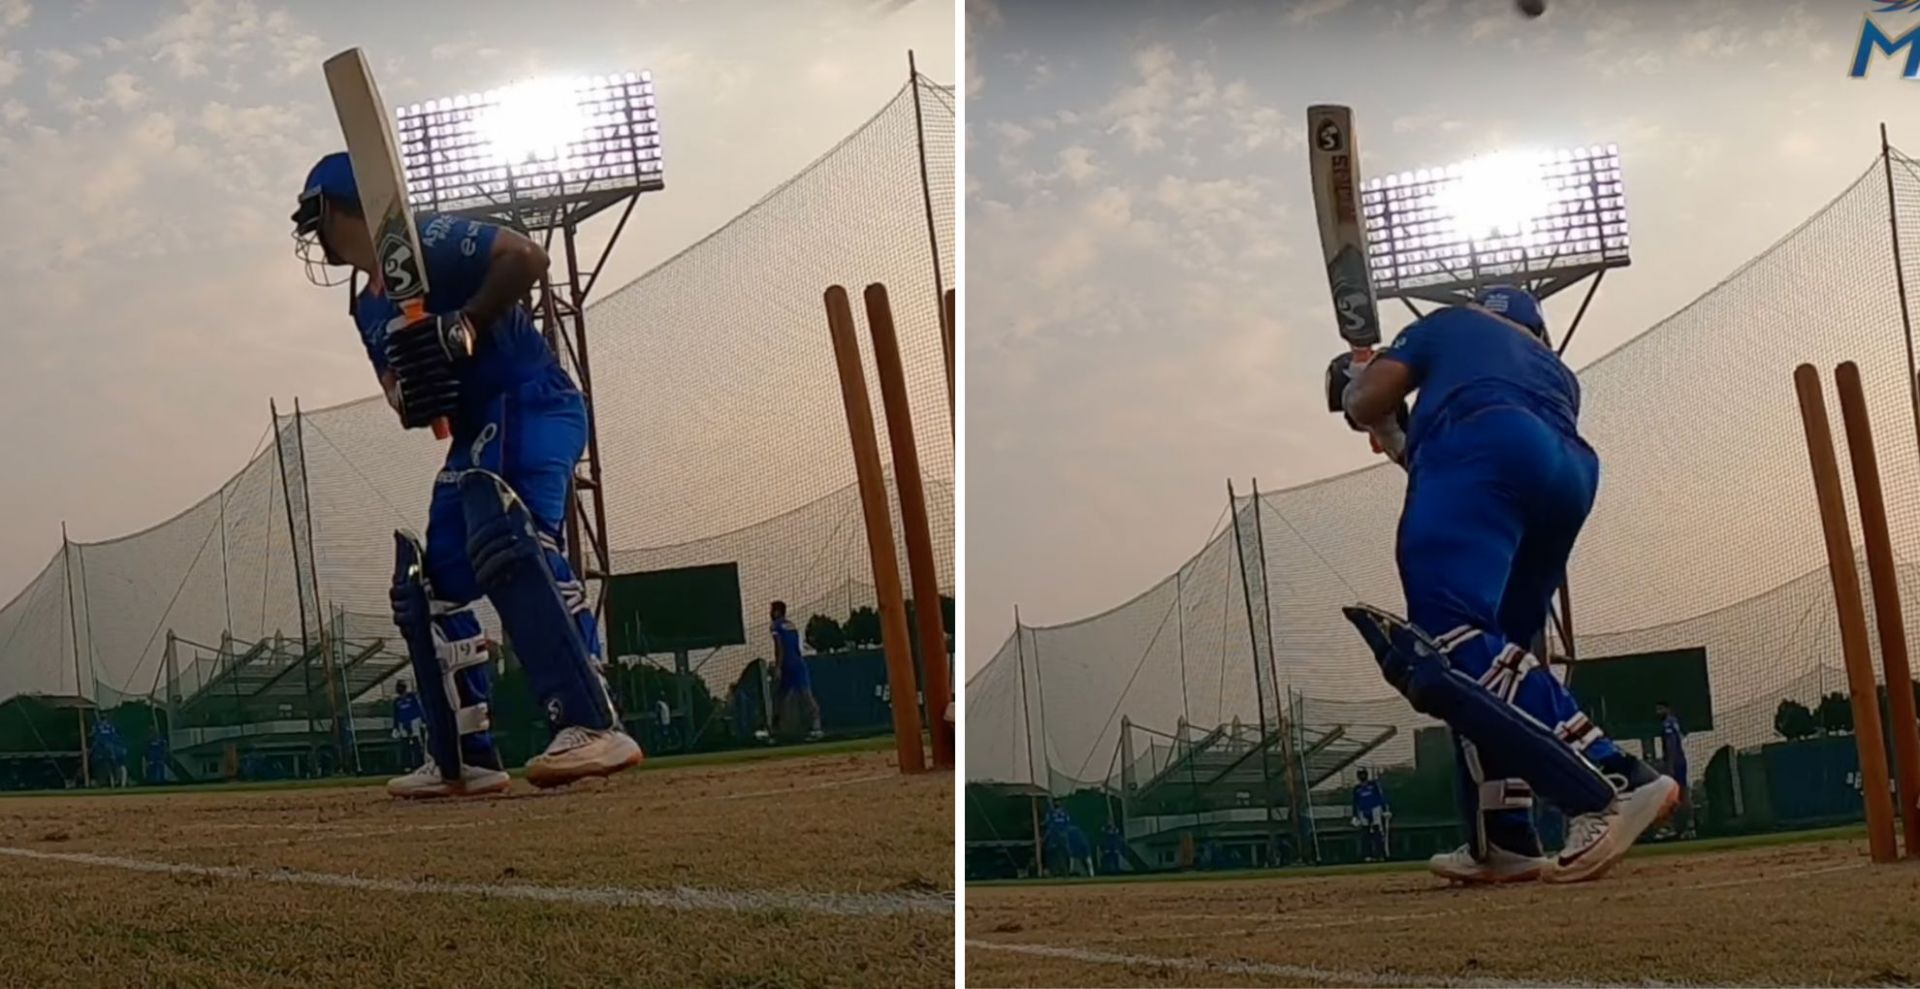 Ishan Kishan produces an outrageous shot in training (Credit: Twitter/MI)